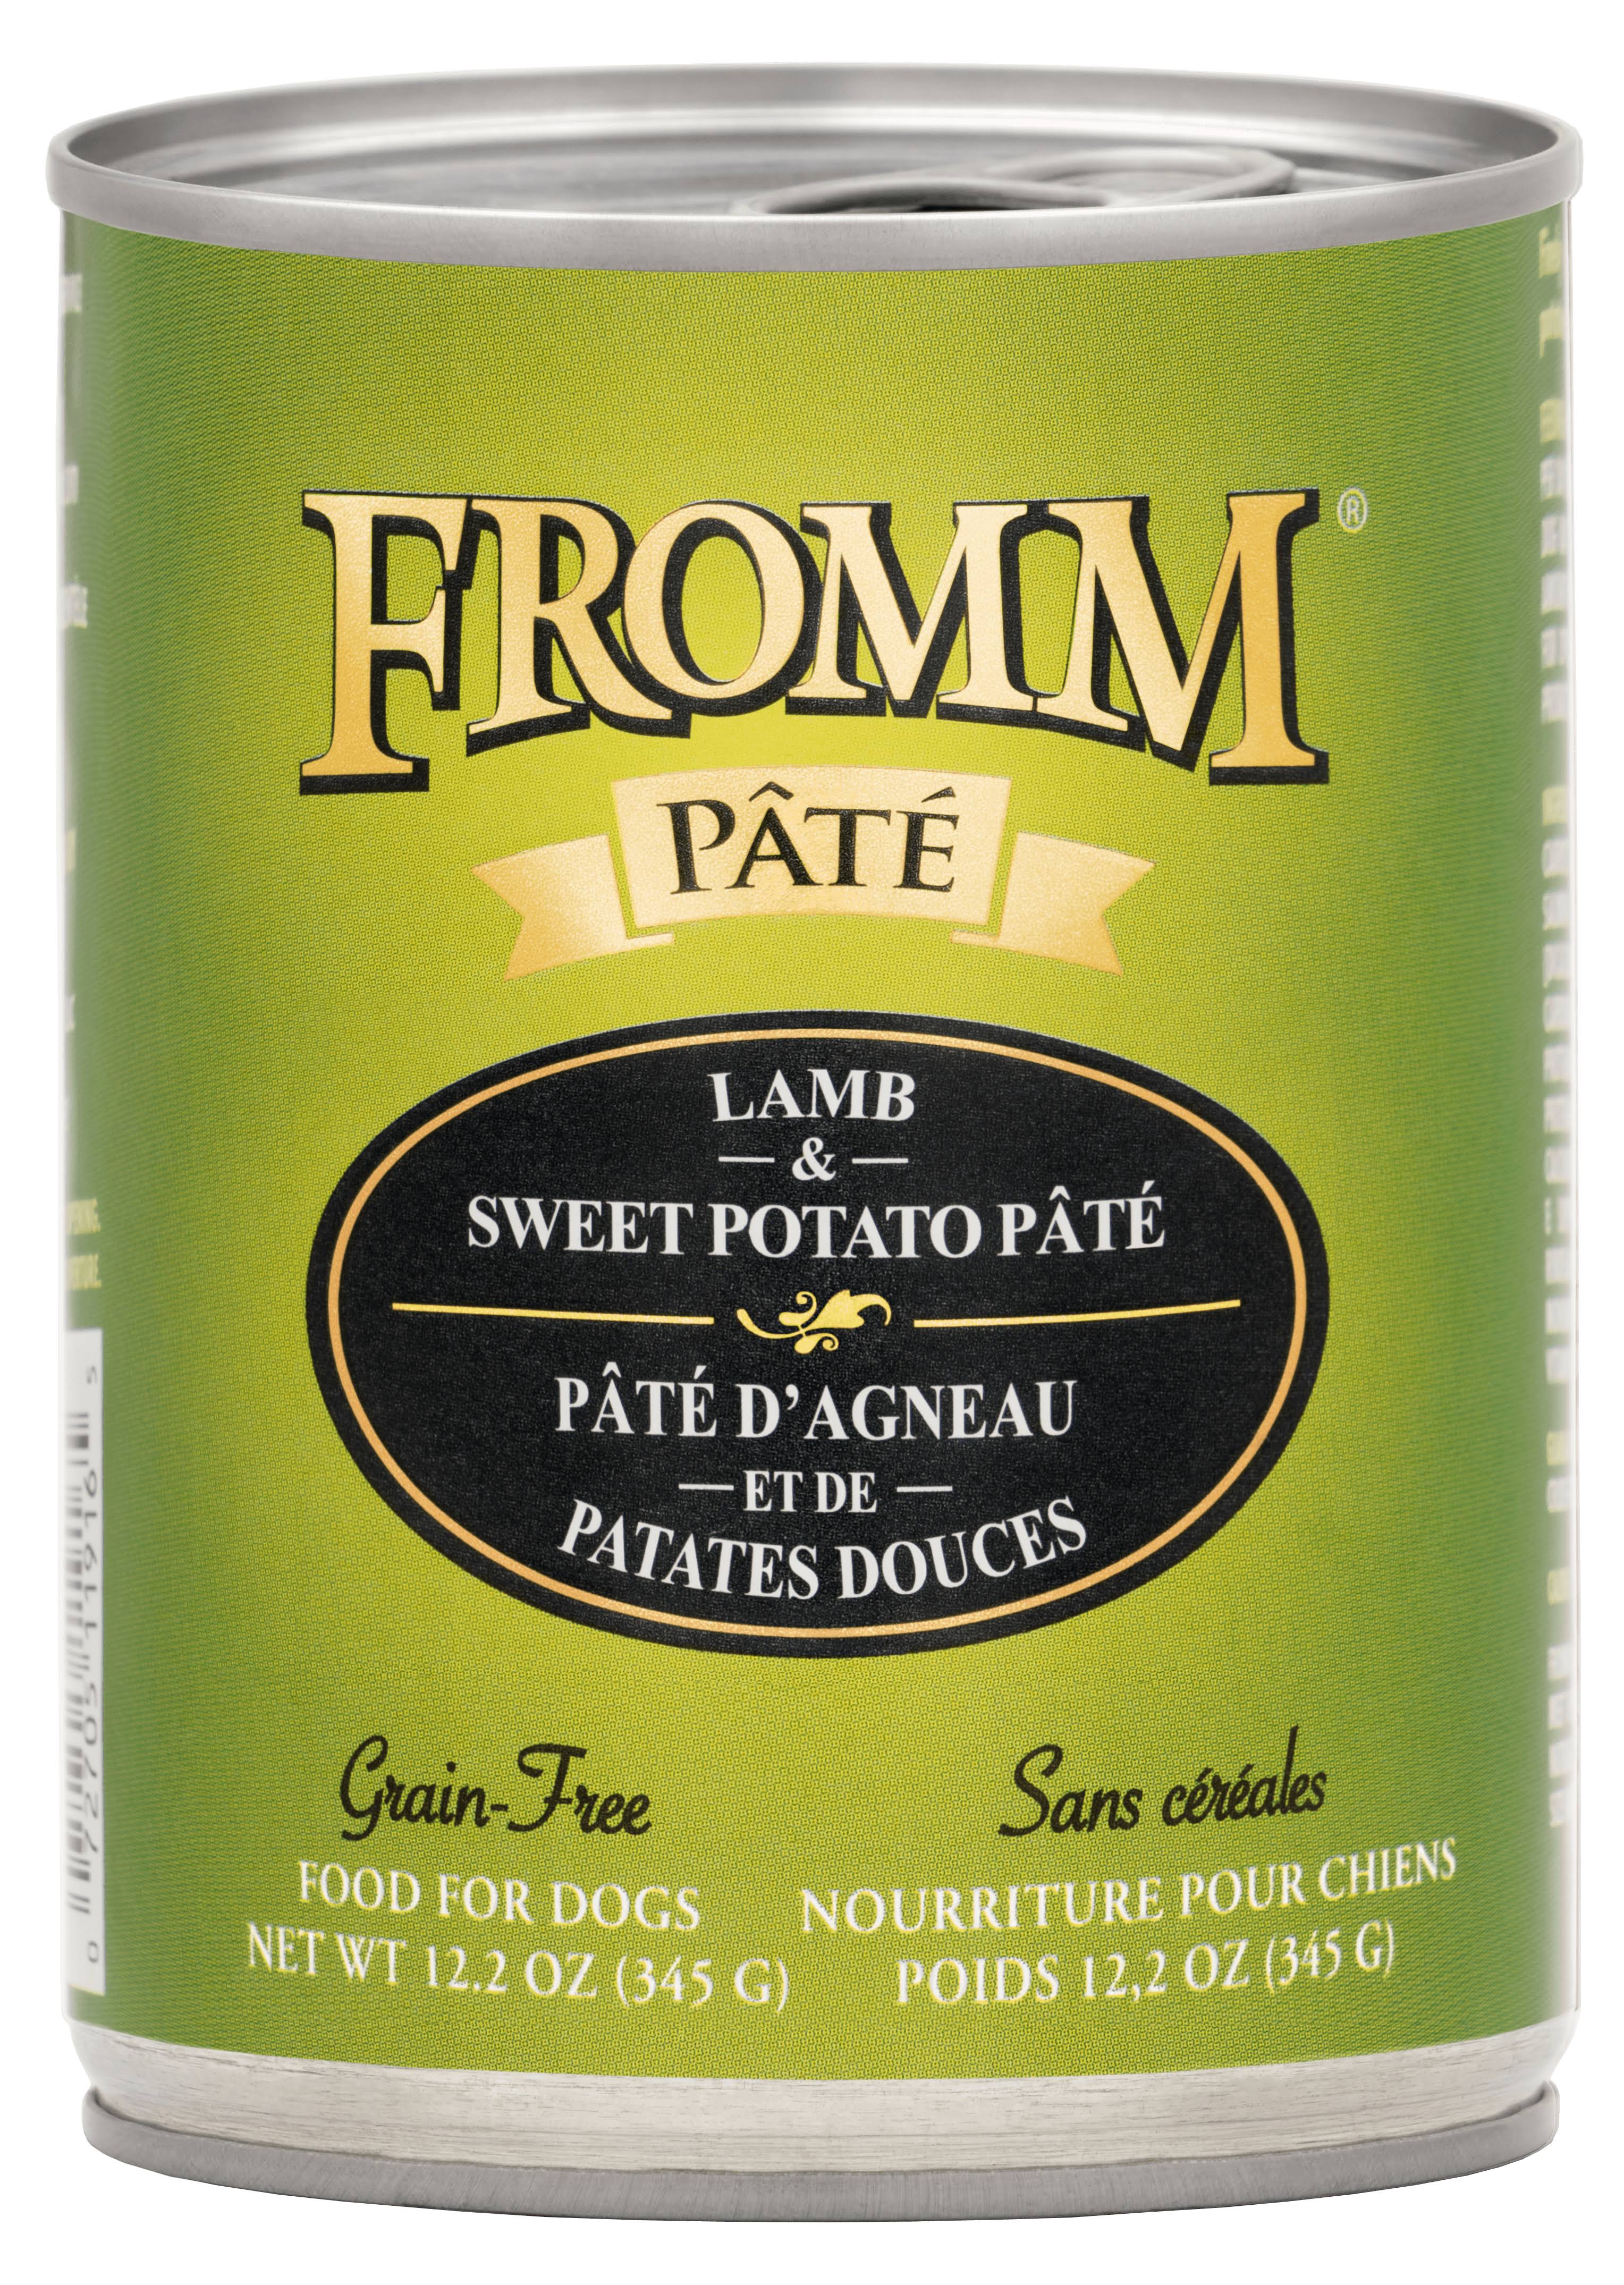 Fromm Lamb & Sweet Potato Pate Canned Dog Food 12.2 oz